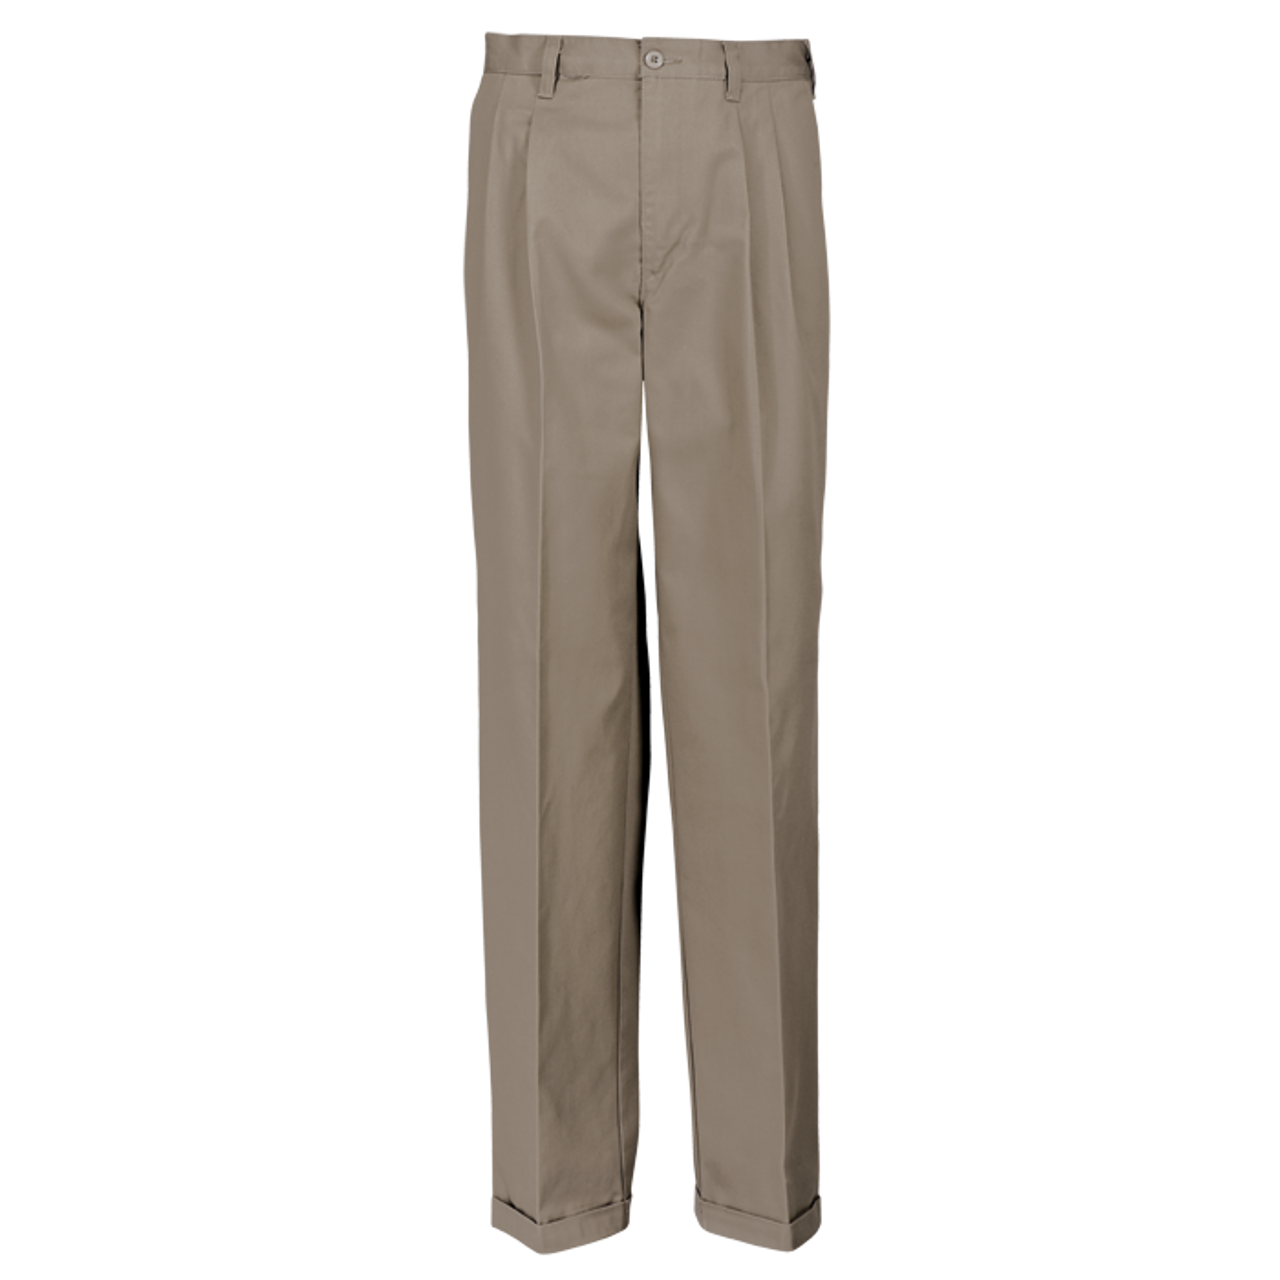 Poly Cotton Chino Pants | Azulwear Cape Town, South Africa